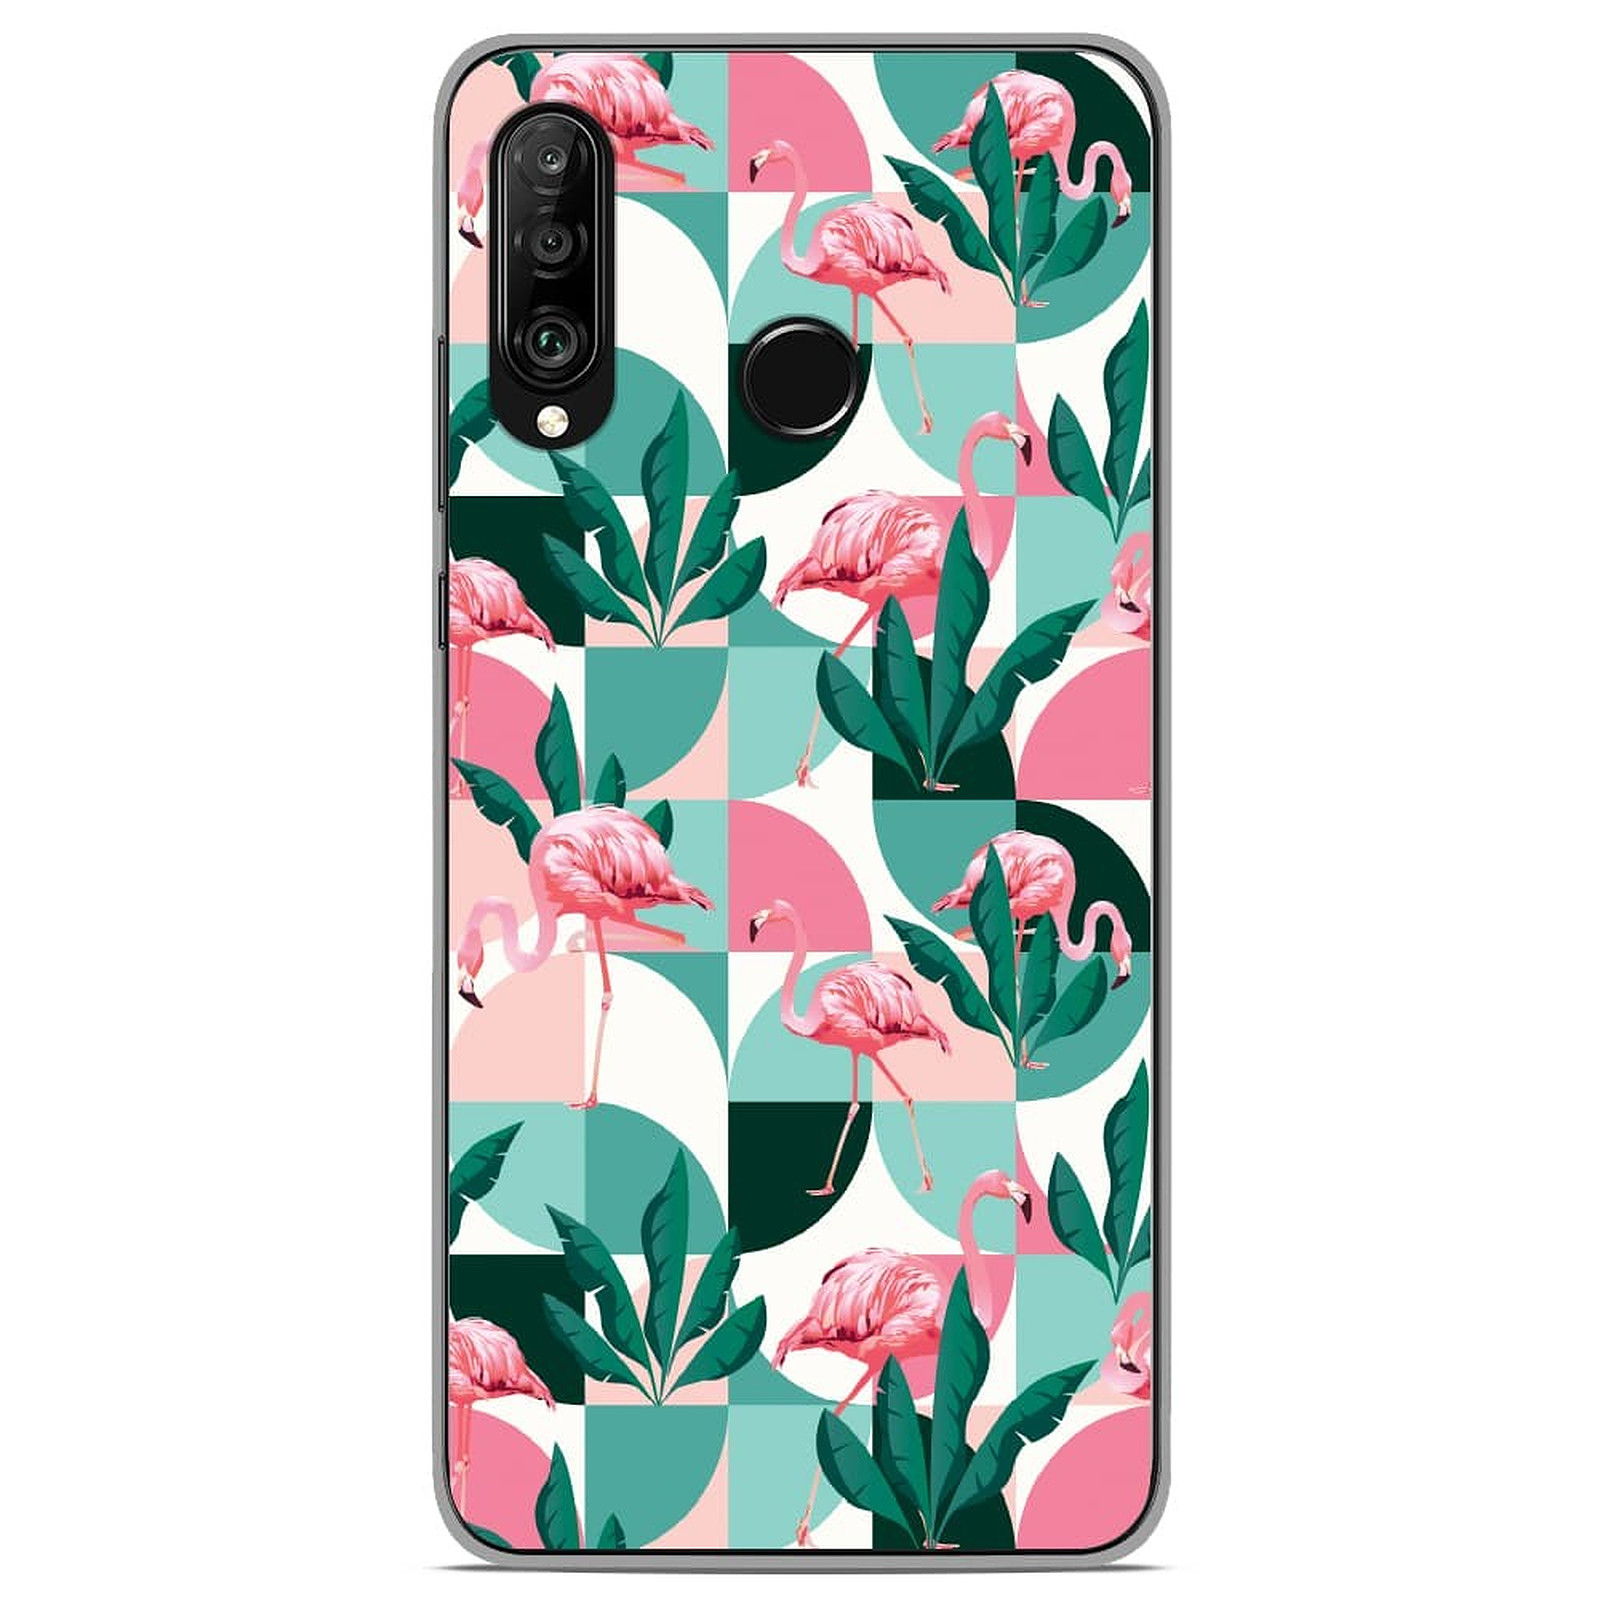 1001 Coques Coque silicone gel Huawei P30 Lite motif Flamants Roses ge´ome´trique - Coque telephone 1001Coques